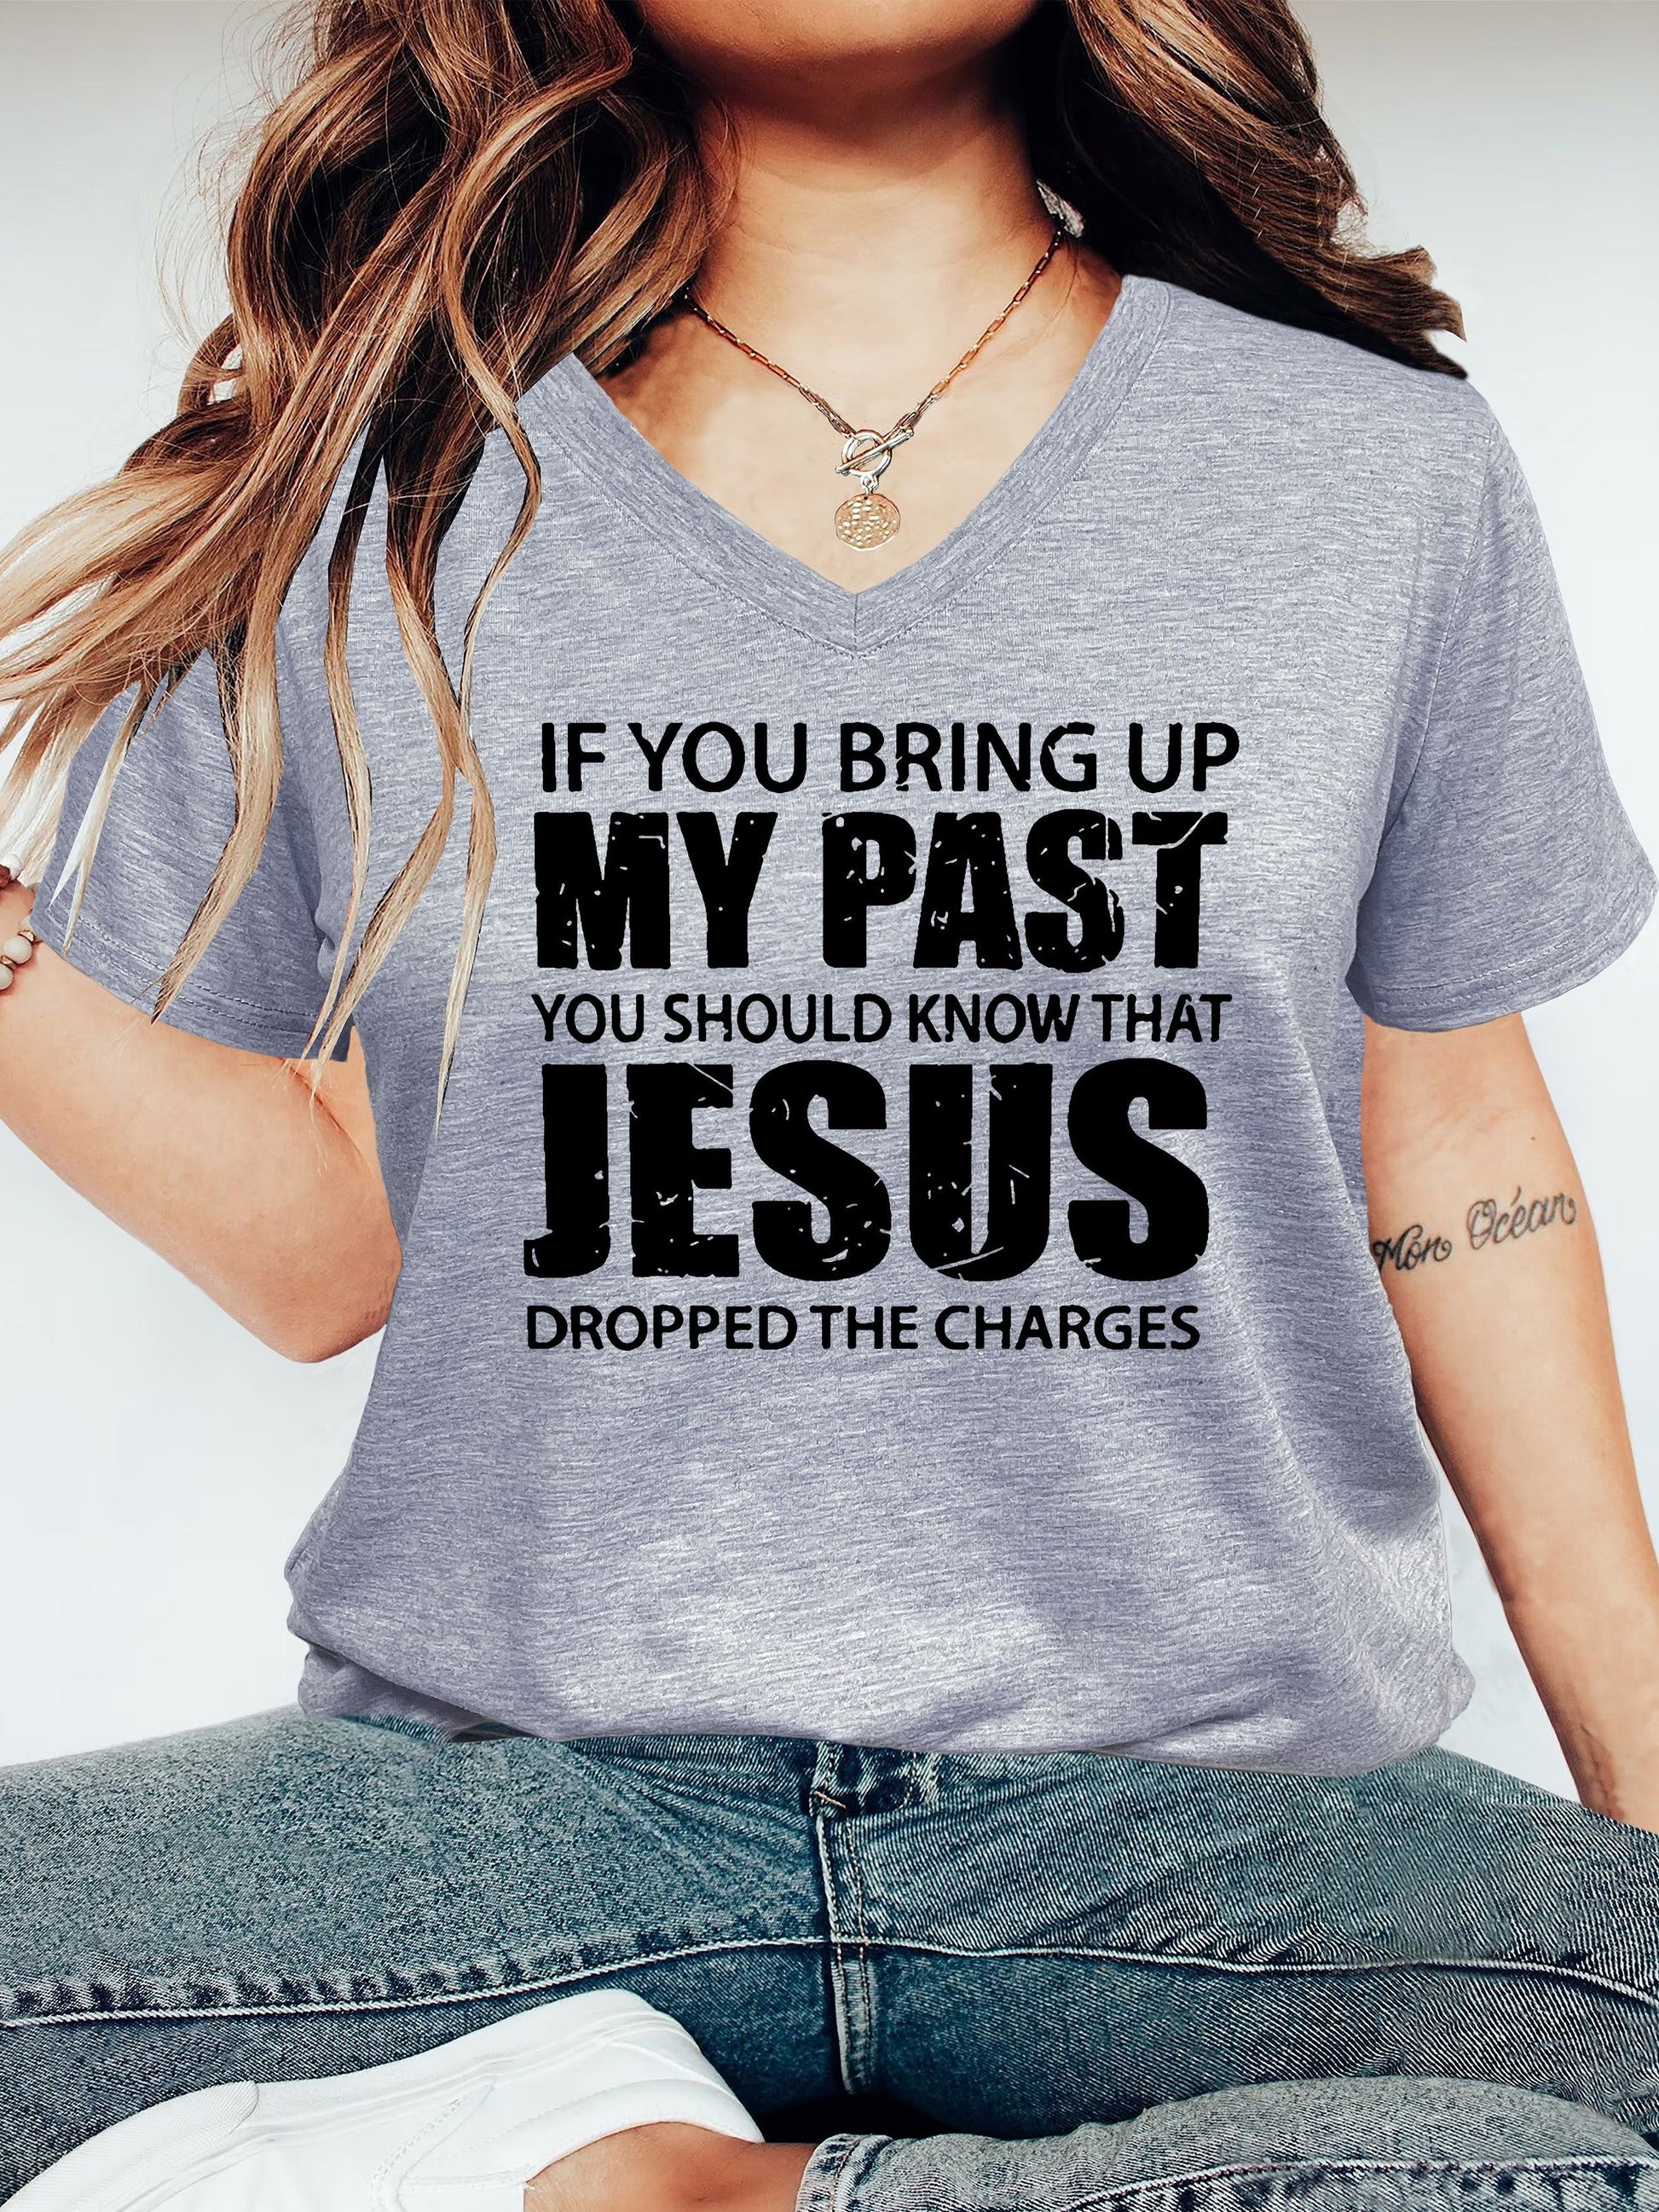 Jesus Dropped The Charges Women's Christian V Neck T-Shirt claimedbygoddesigns